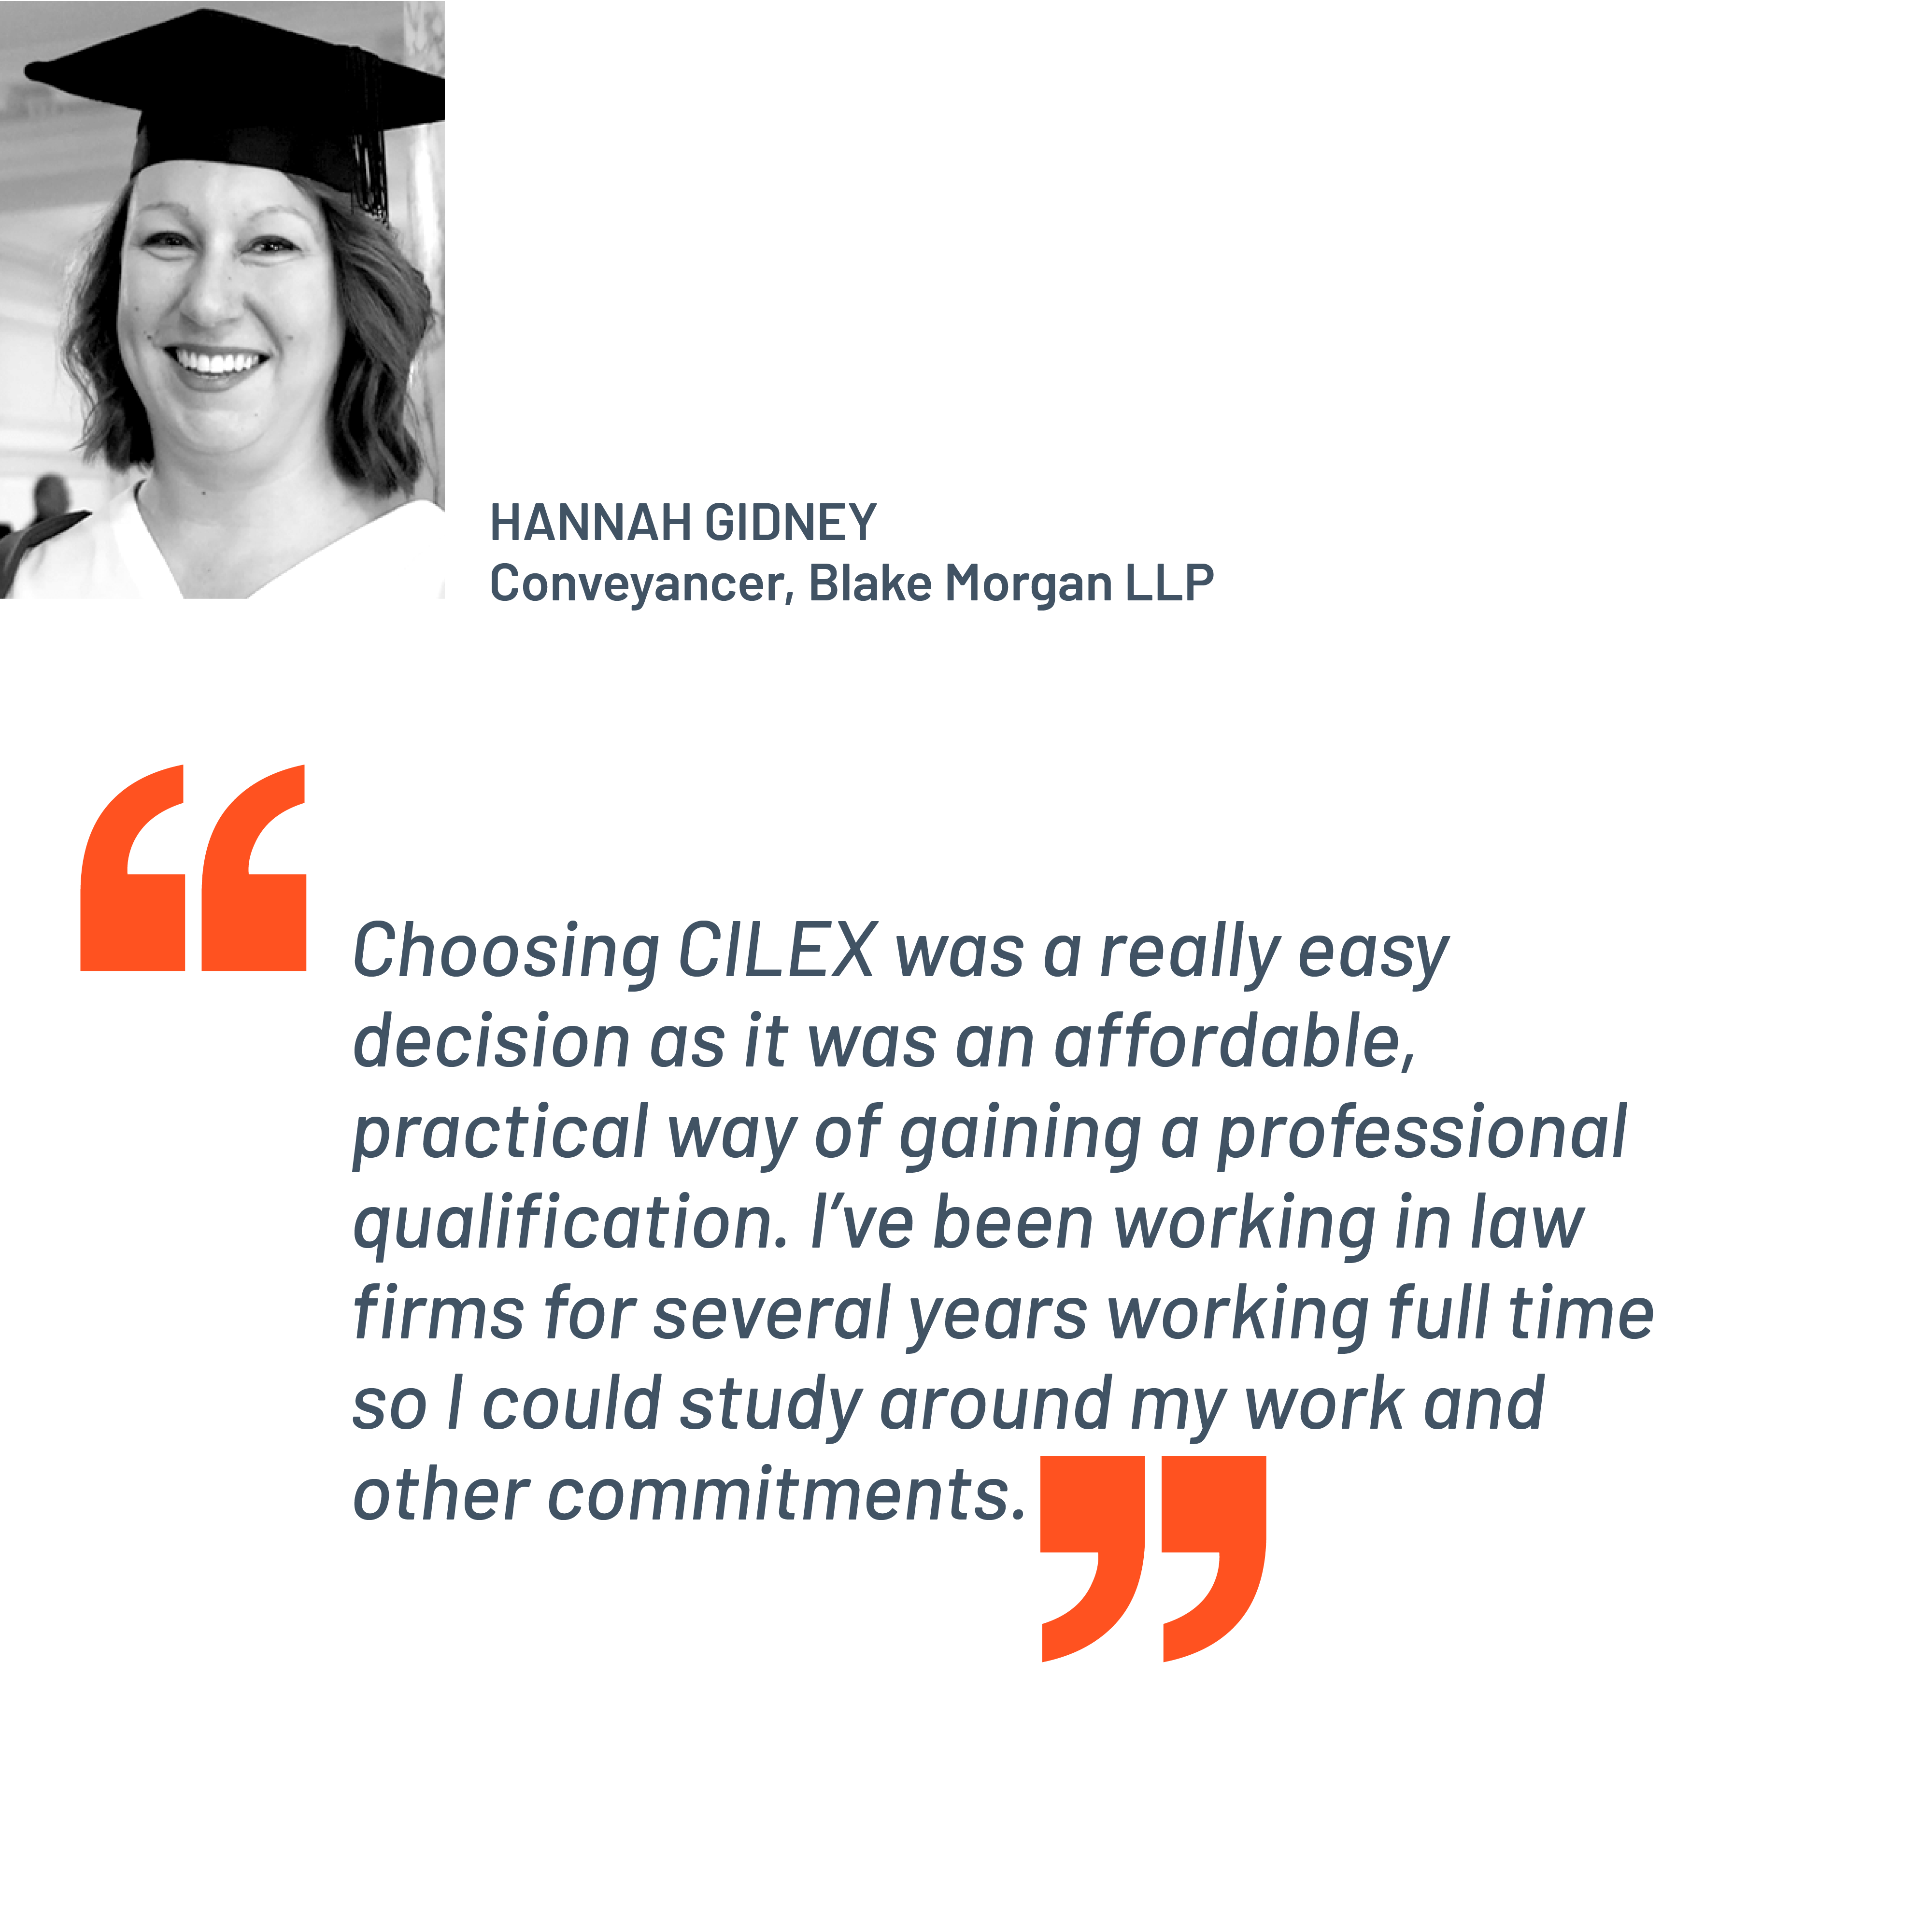 Quote from Hannah Gidney, Conveyancer, Blake Morgan LLP. "Choosing CILEX was a really easy decision as it was an affordable, practical way of gaining a professional qualification. I’ve been working in law firms for several years working full time so I could study around my work and other commitments.”